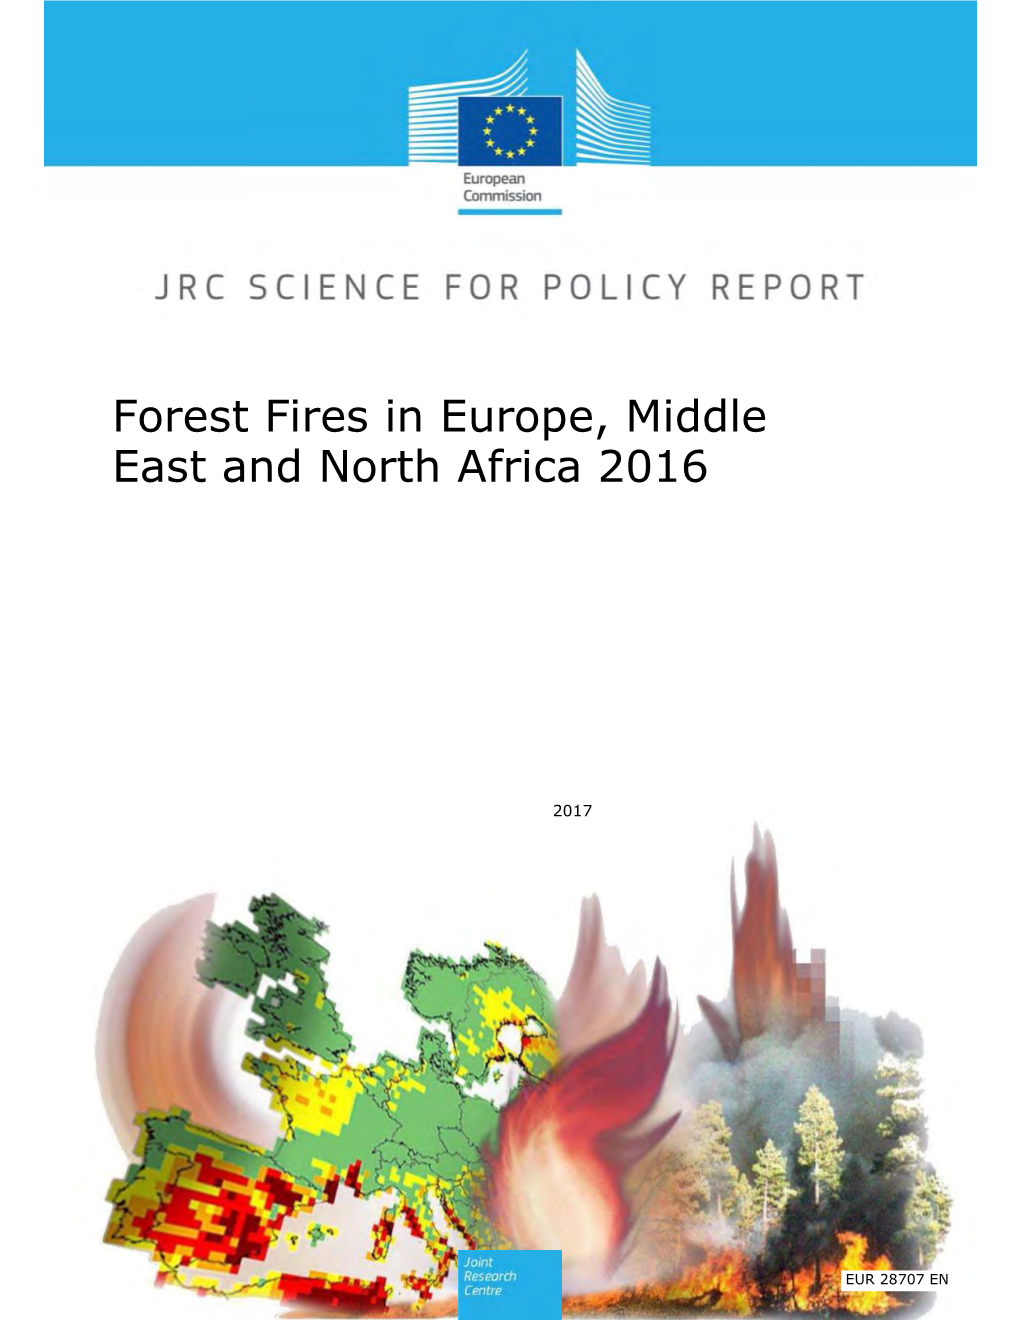 Forest Fires in Europe, Middle East and North Africa 2016